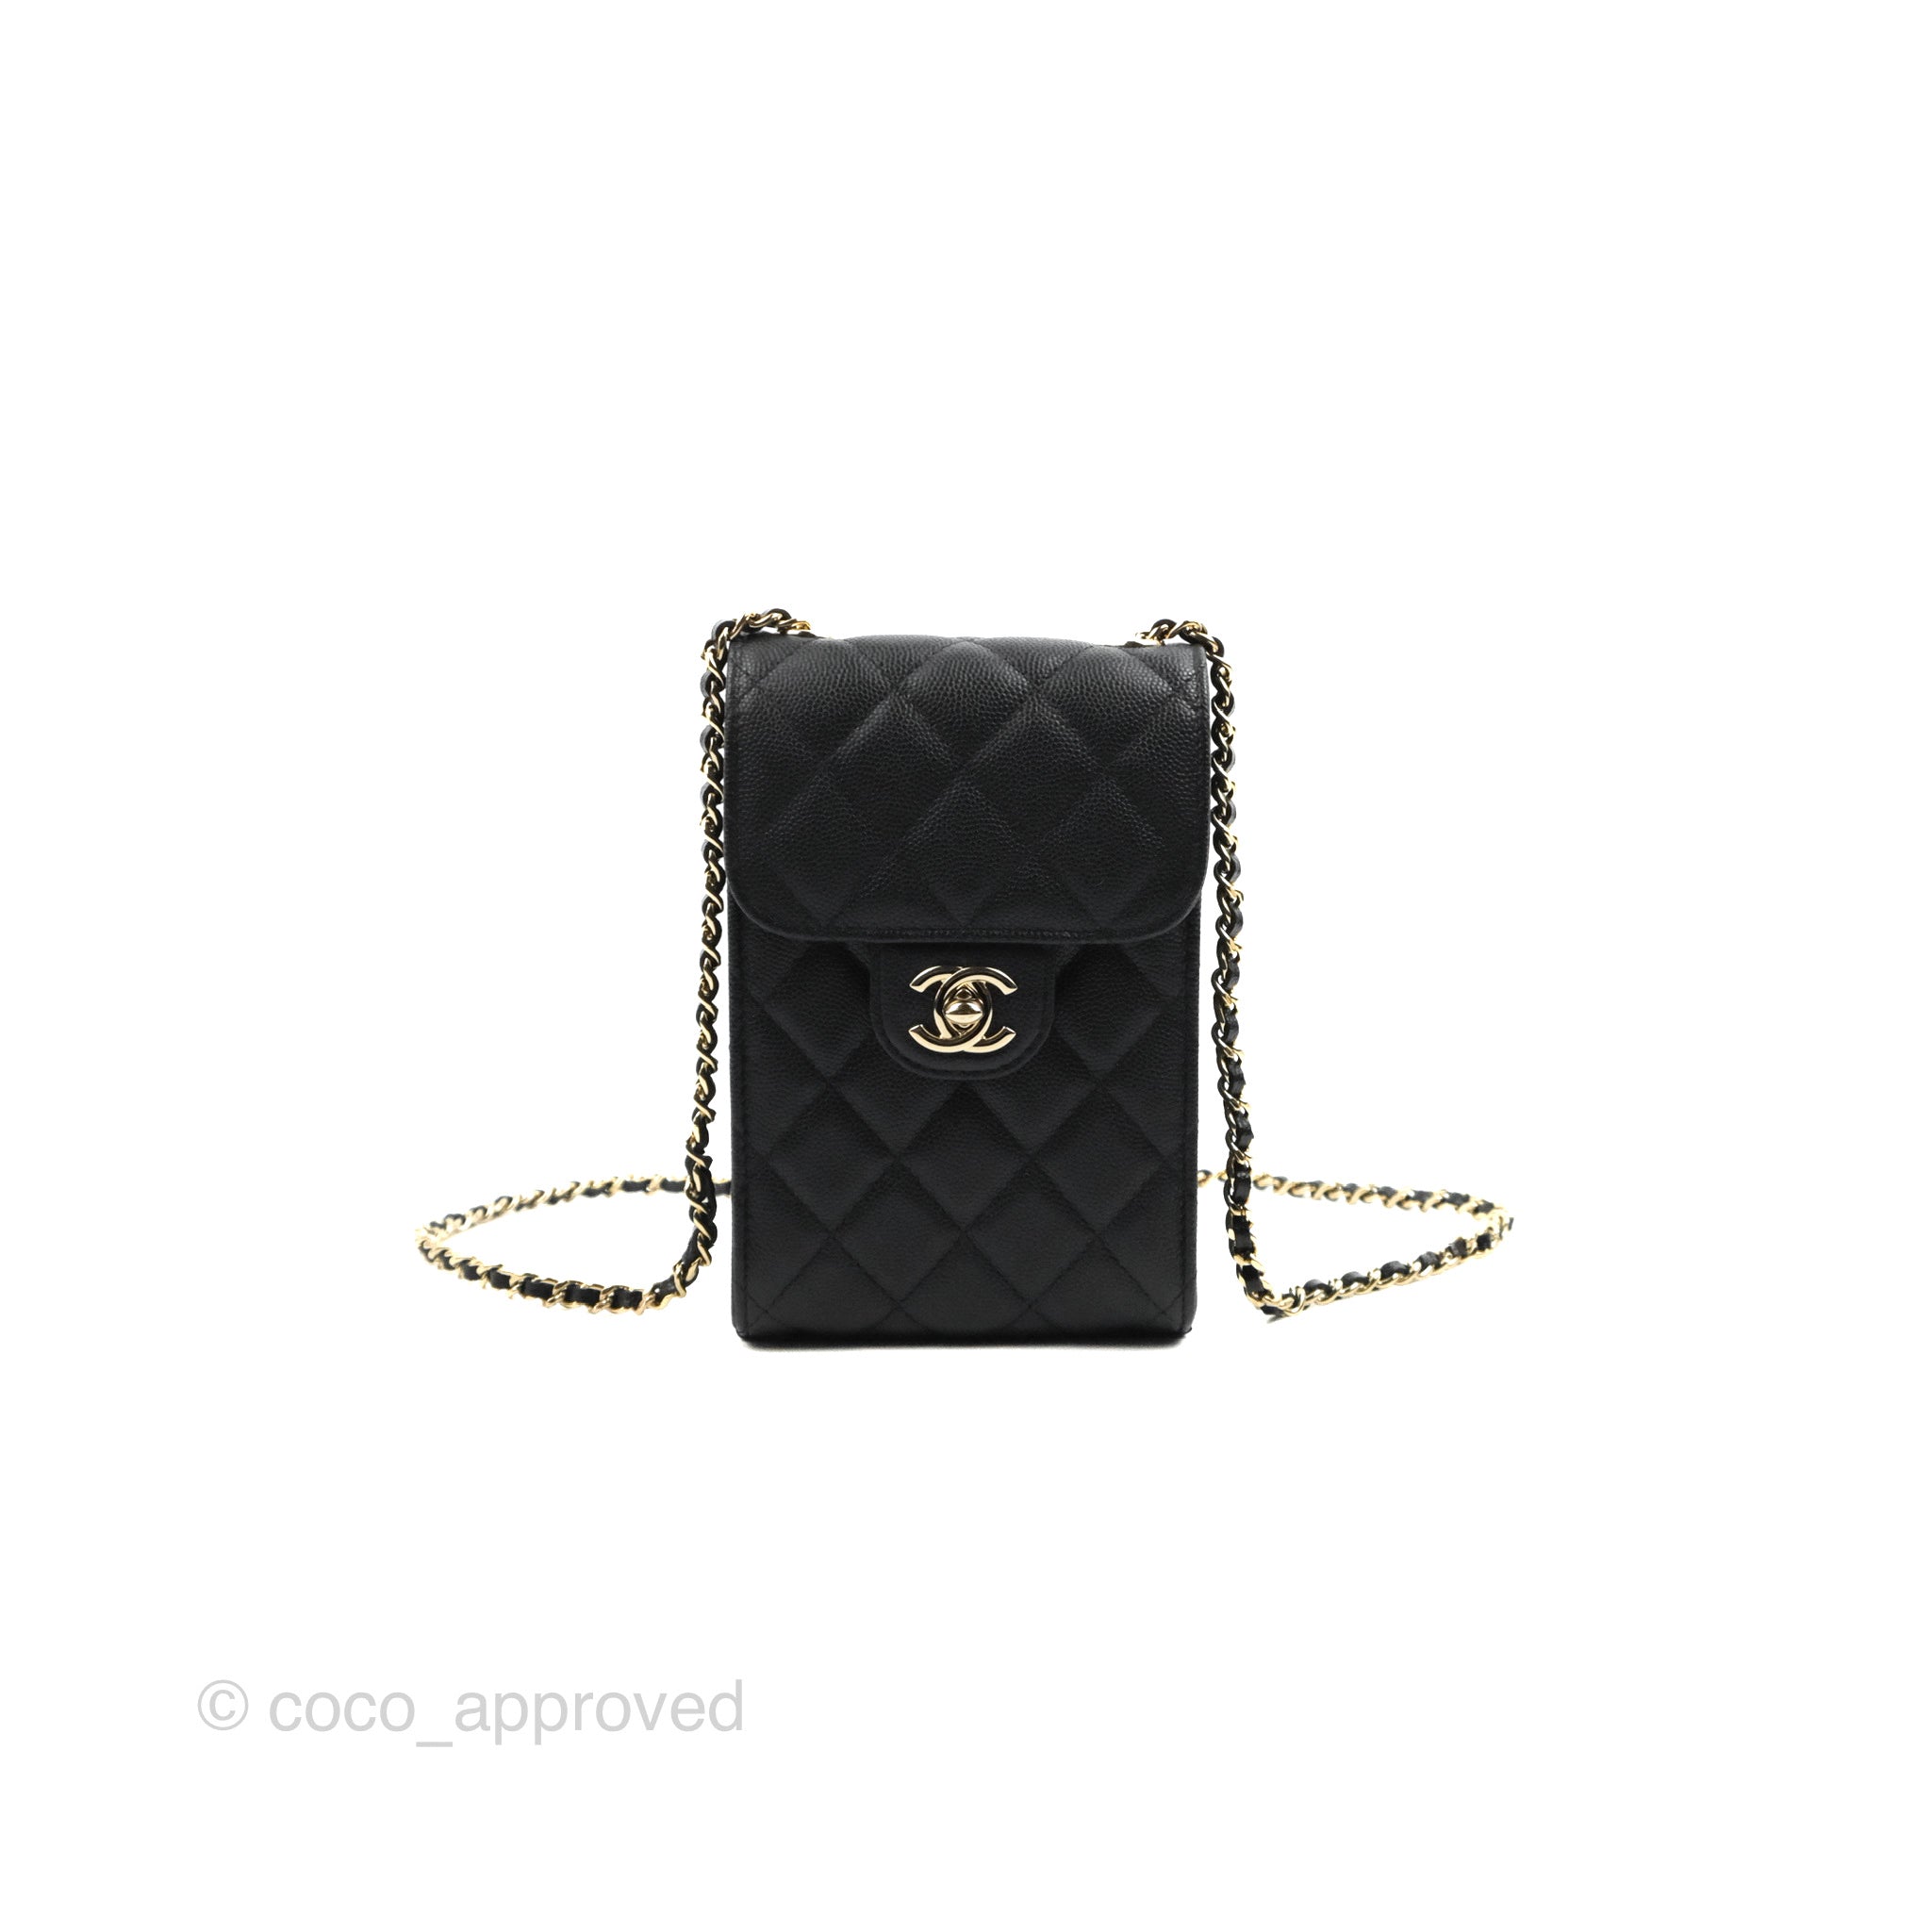 BRAND NEW ! Chanel Black Caviar Classic Flap Phone Holder with